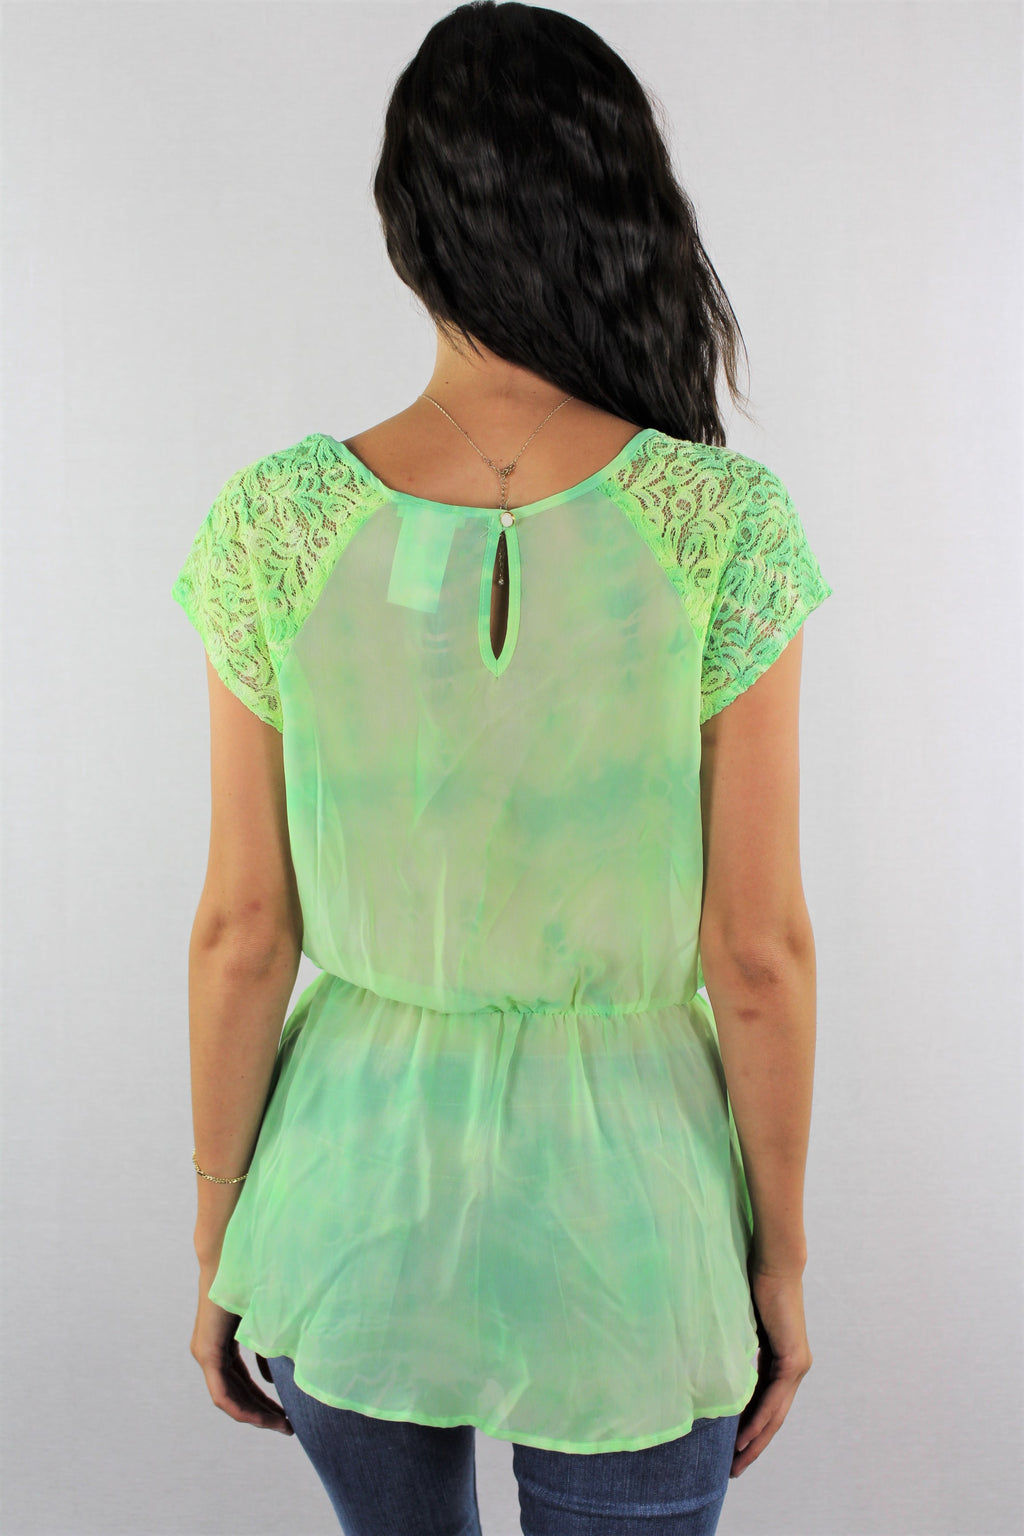 Women's Cap Sleeve Neon Green Top with Lace Detail